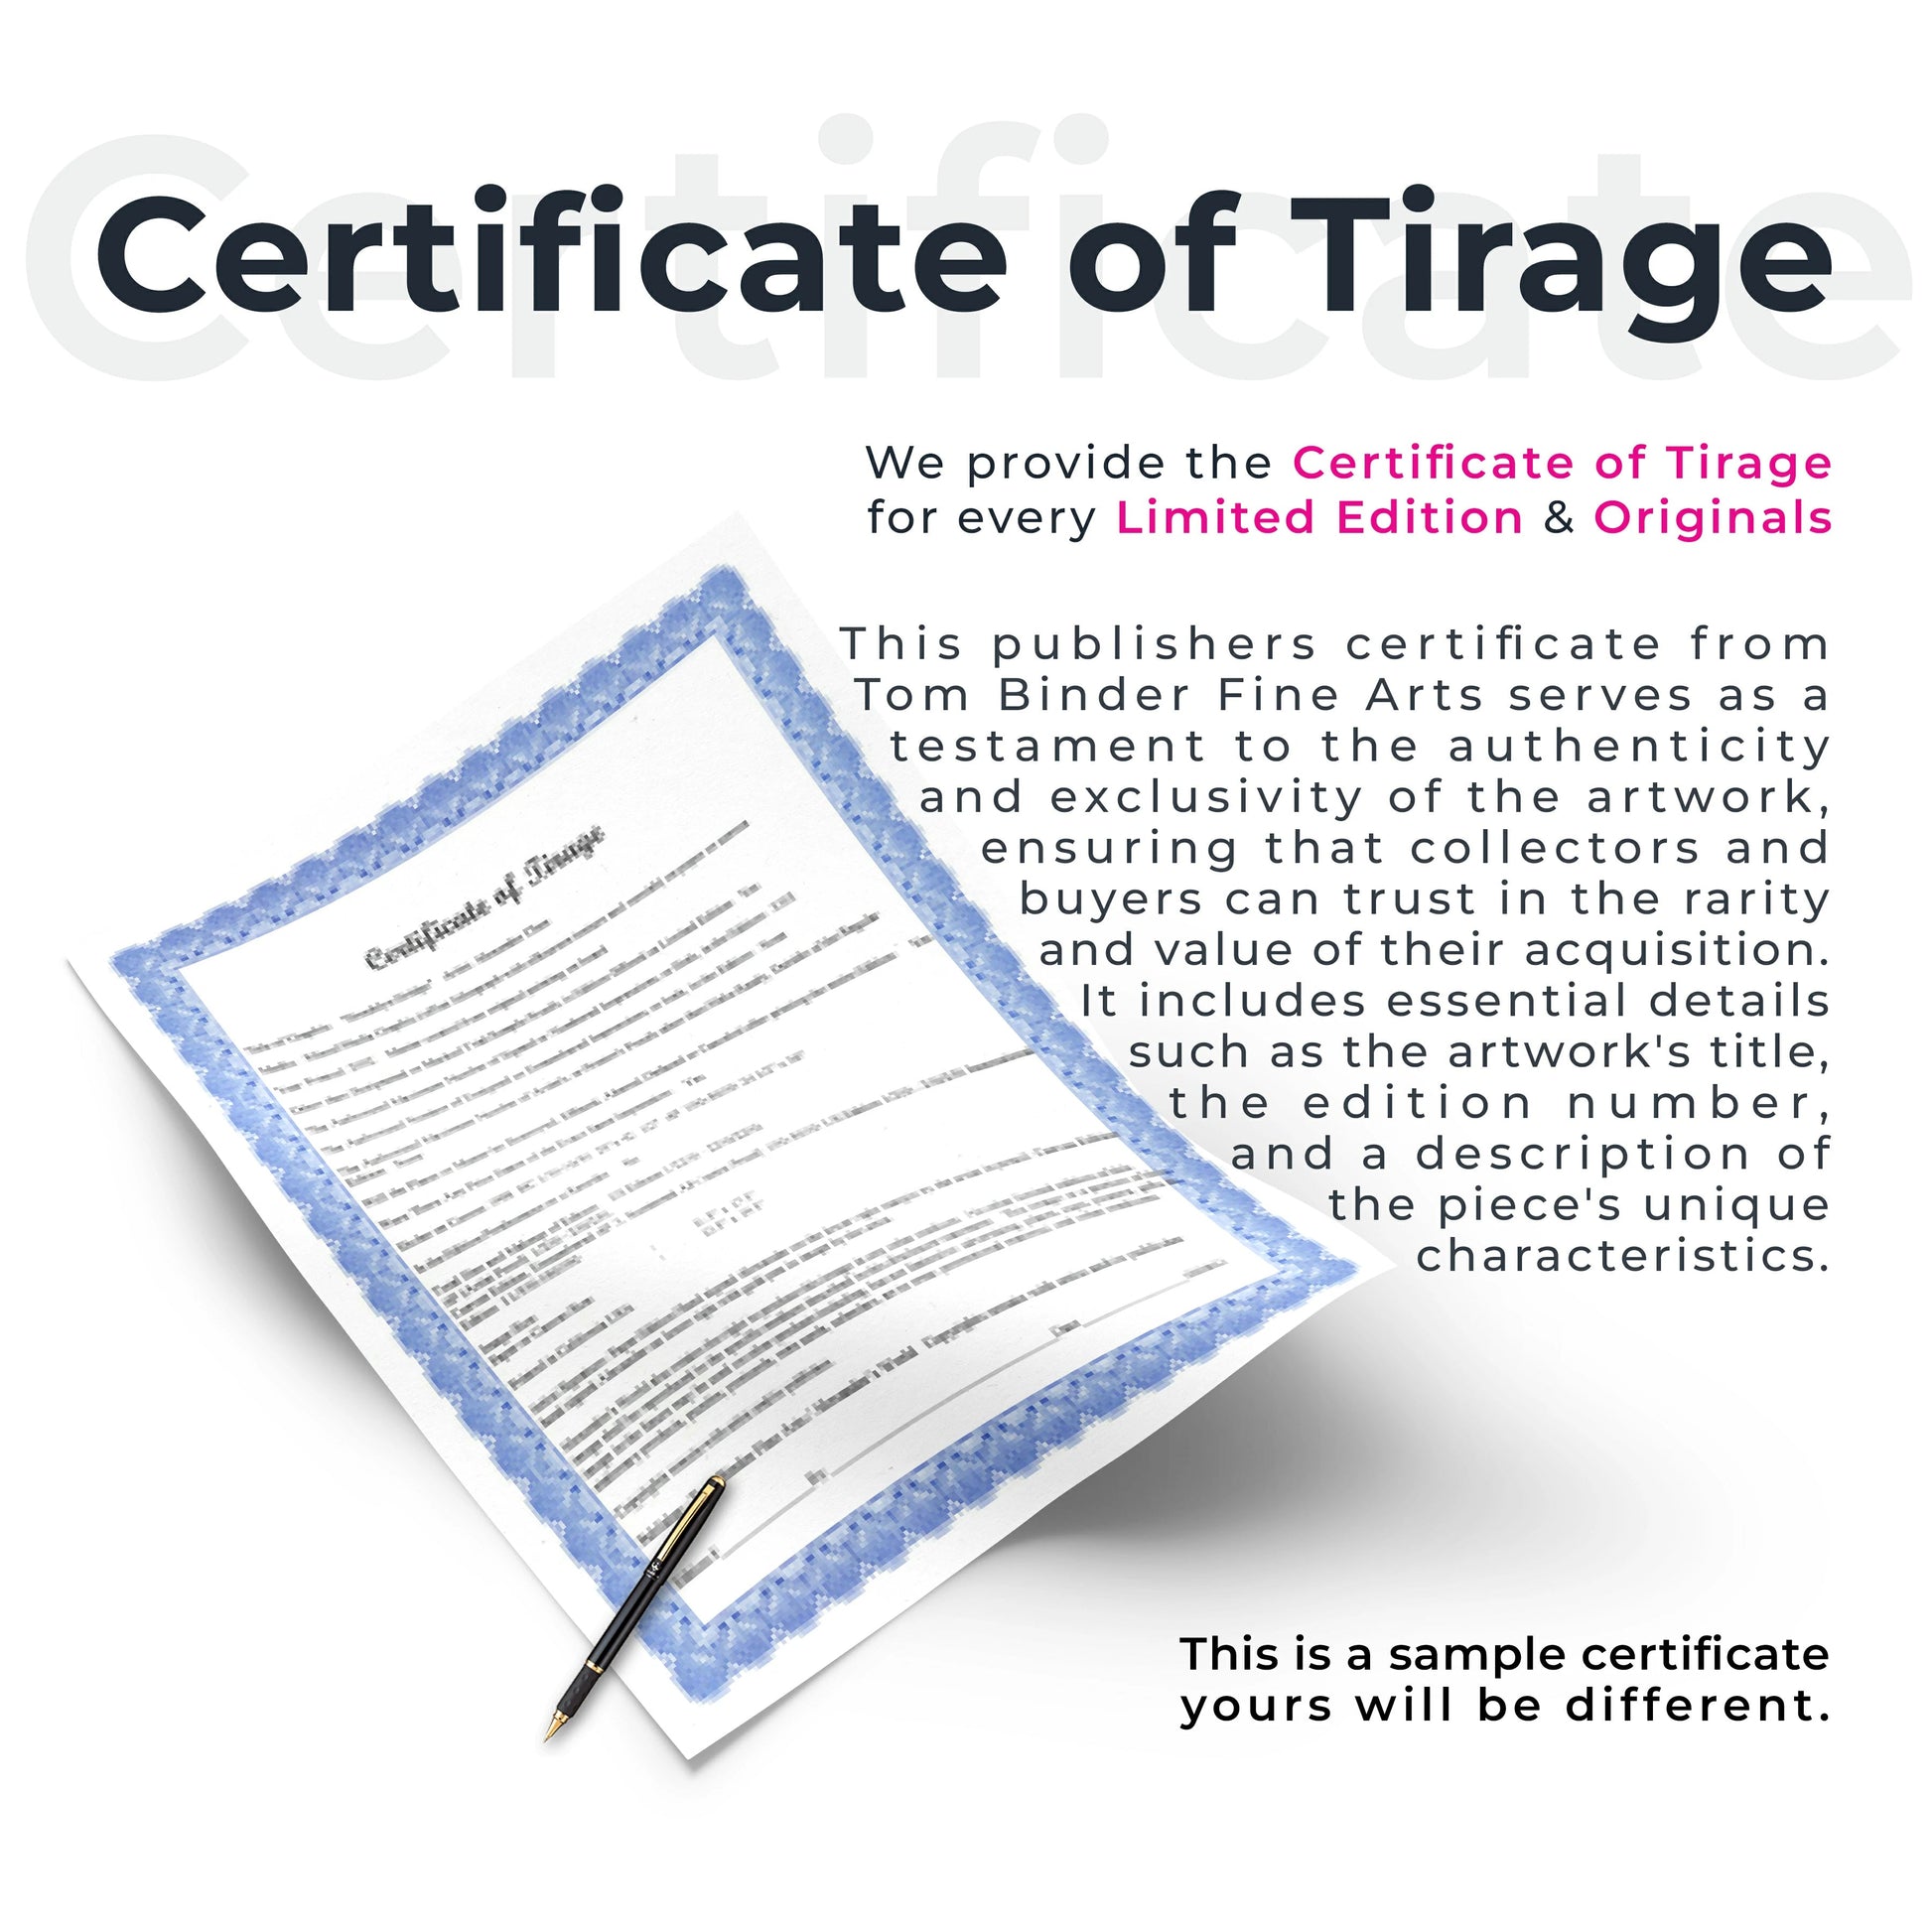 Certificate of Tirage - Certificate of authenticity